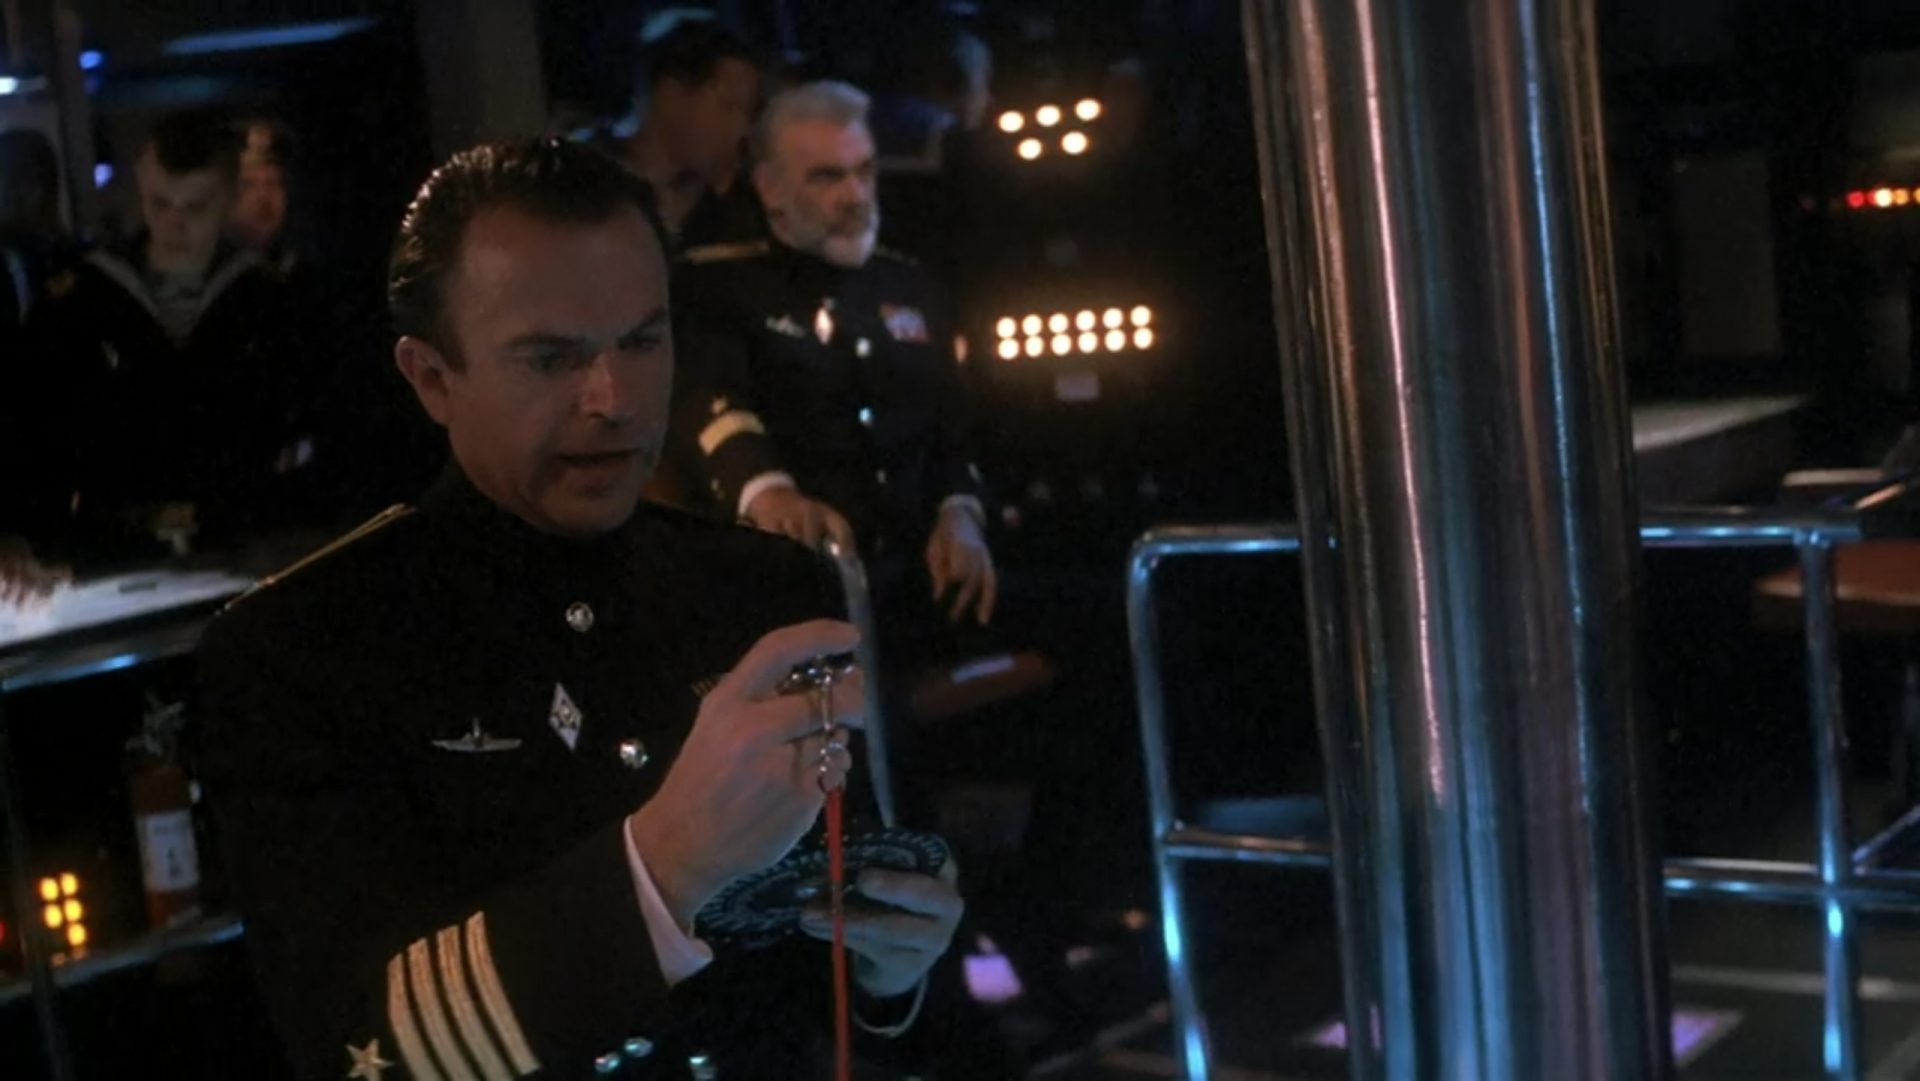 Tense atmosphere in the command center of the Soviet nuclear submarine "Red October", in the foreground Sam Neill as first officer looking at the stopwatch, in the background Sean Connery as commander.